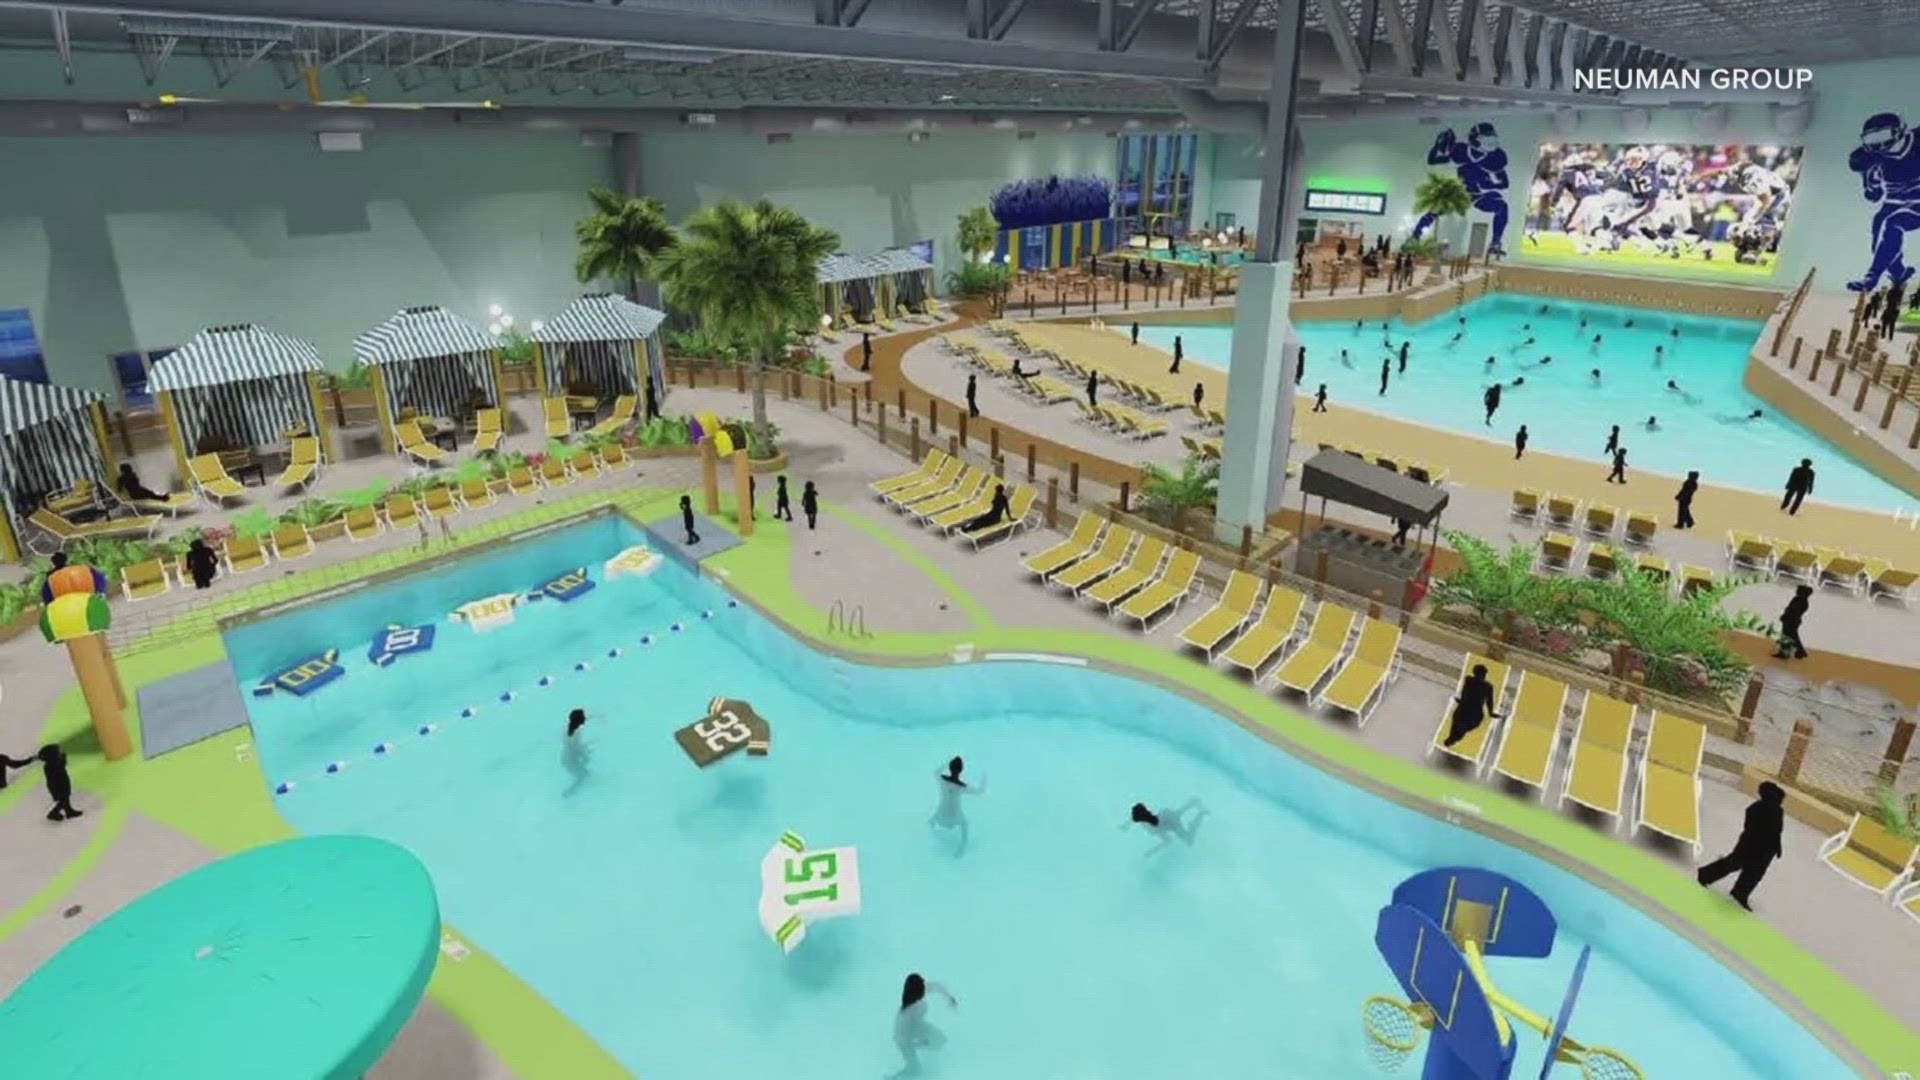 The Gameday Bay water park will feature slides, lazy river, wave pool and large jumbotrons throughout the indoor experience.